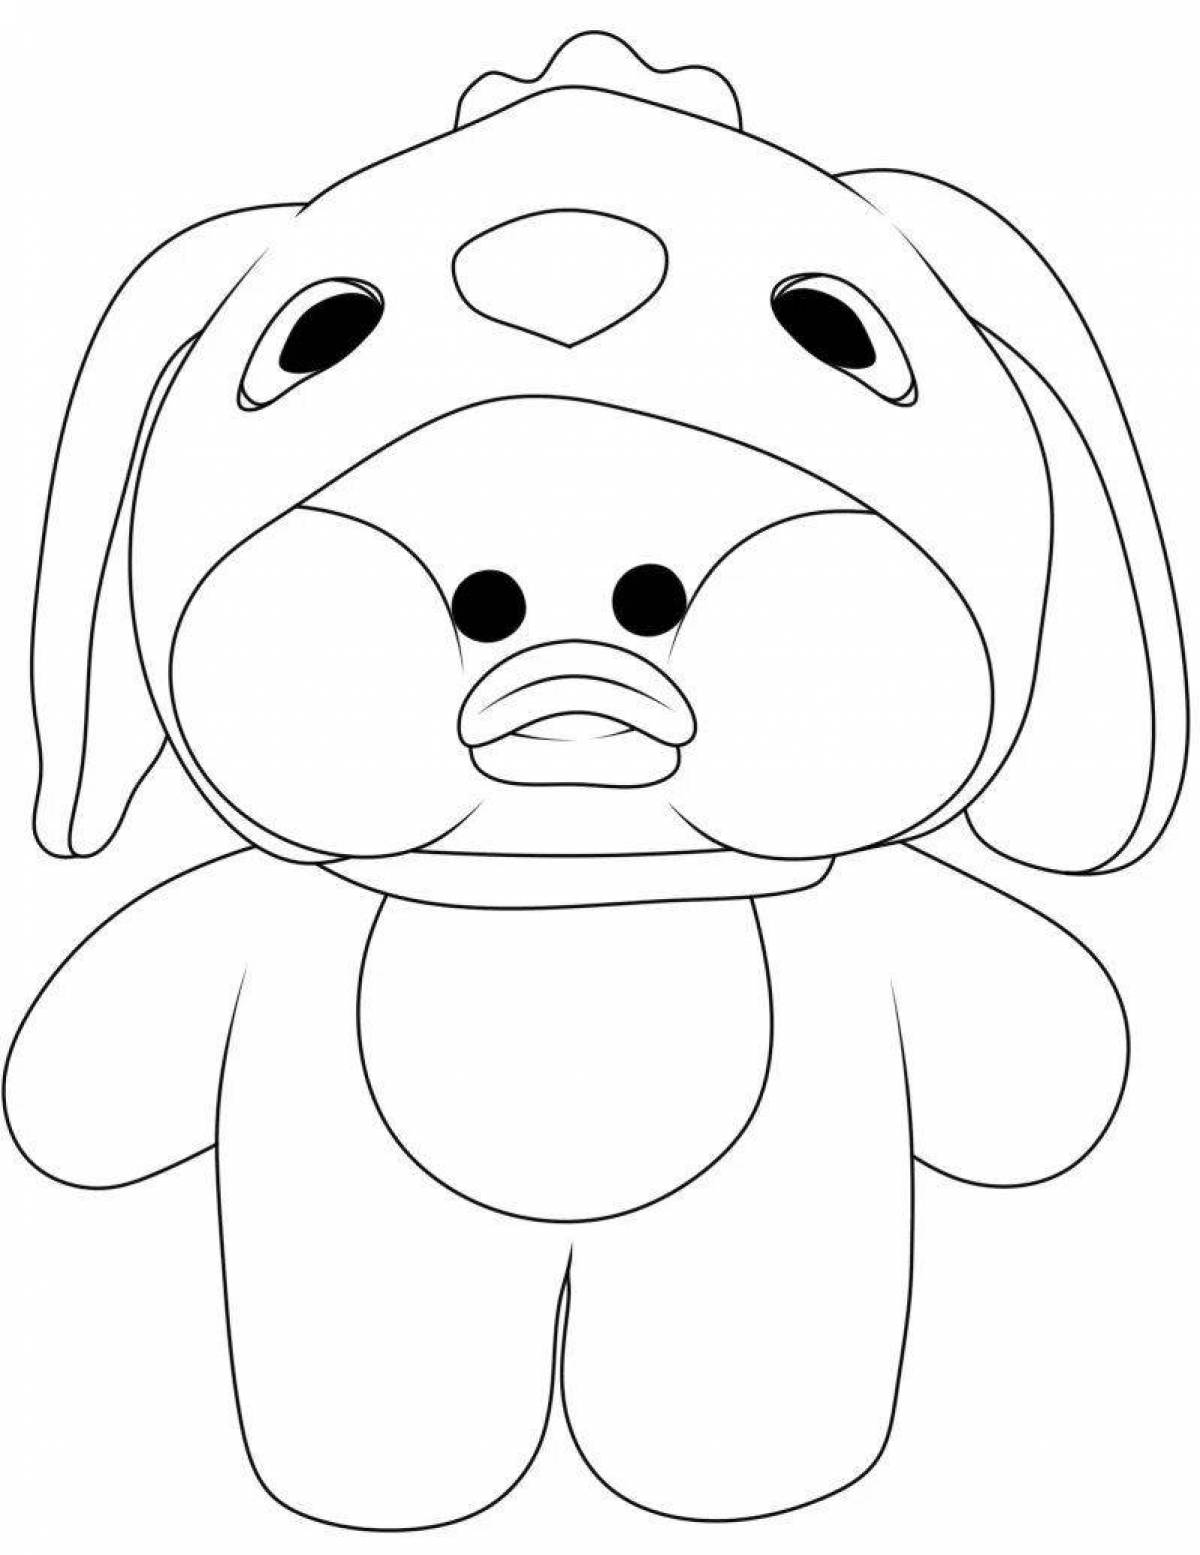 Colorful lalafanfan duck coloring page